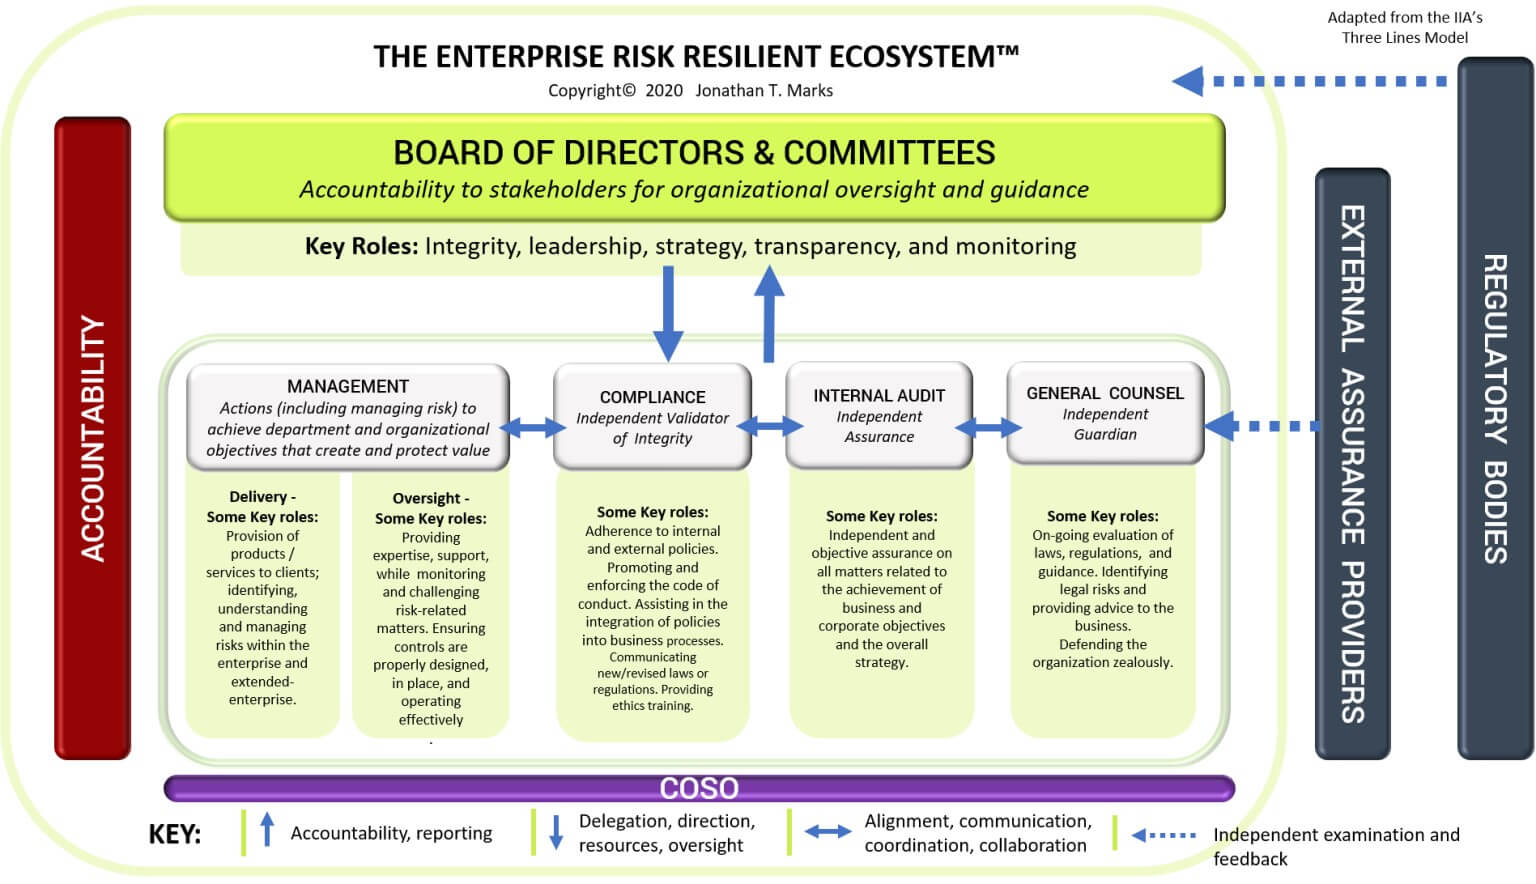 Diagram of the Enterprise Risk Resilient EcoSystem from Baker Tilly, speaking to the "modern world" and the need for flexibility in corporate risk management.